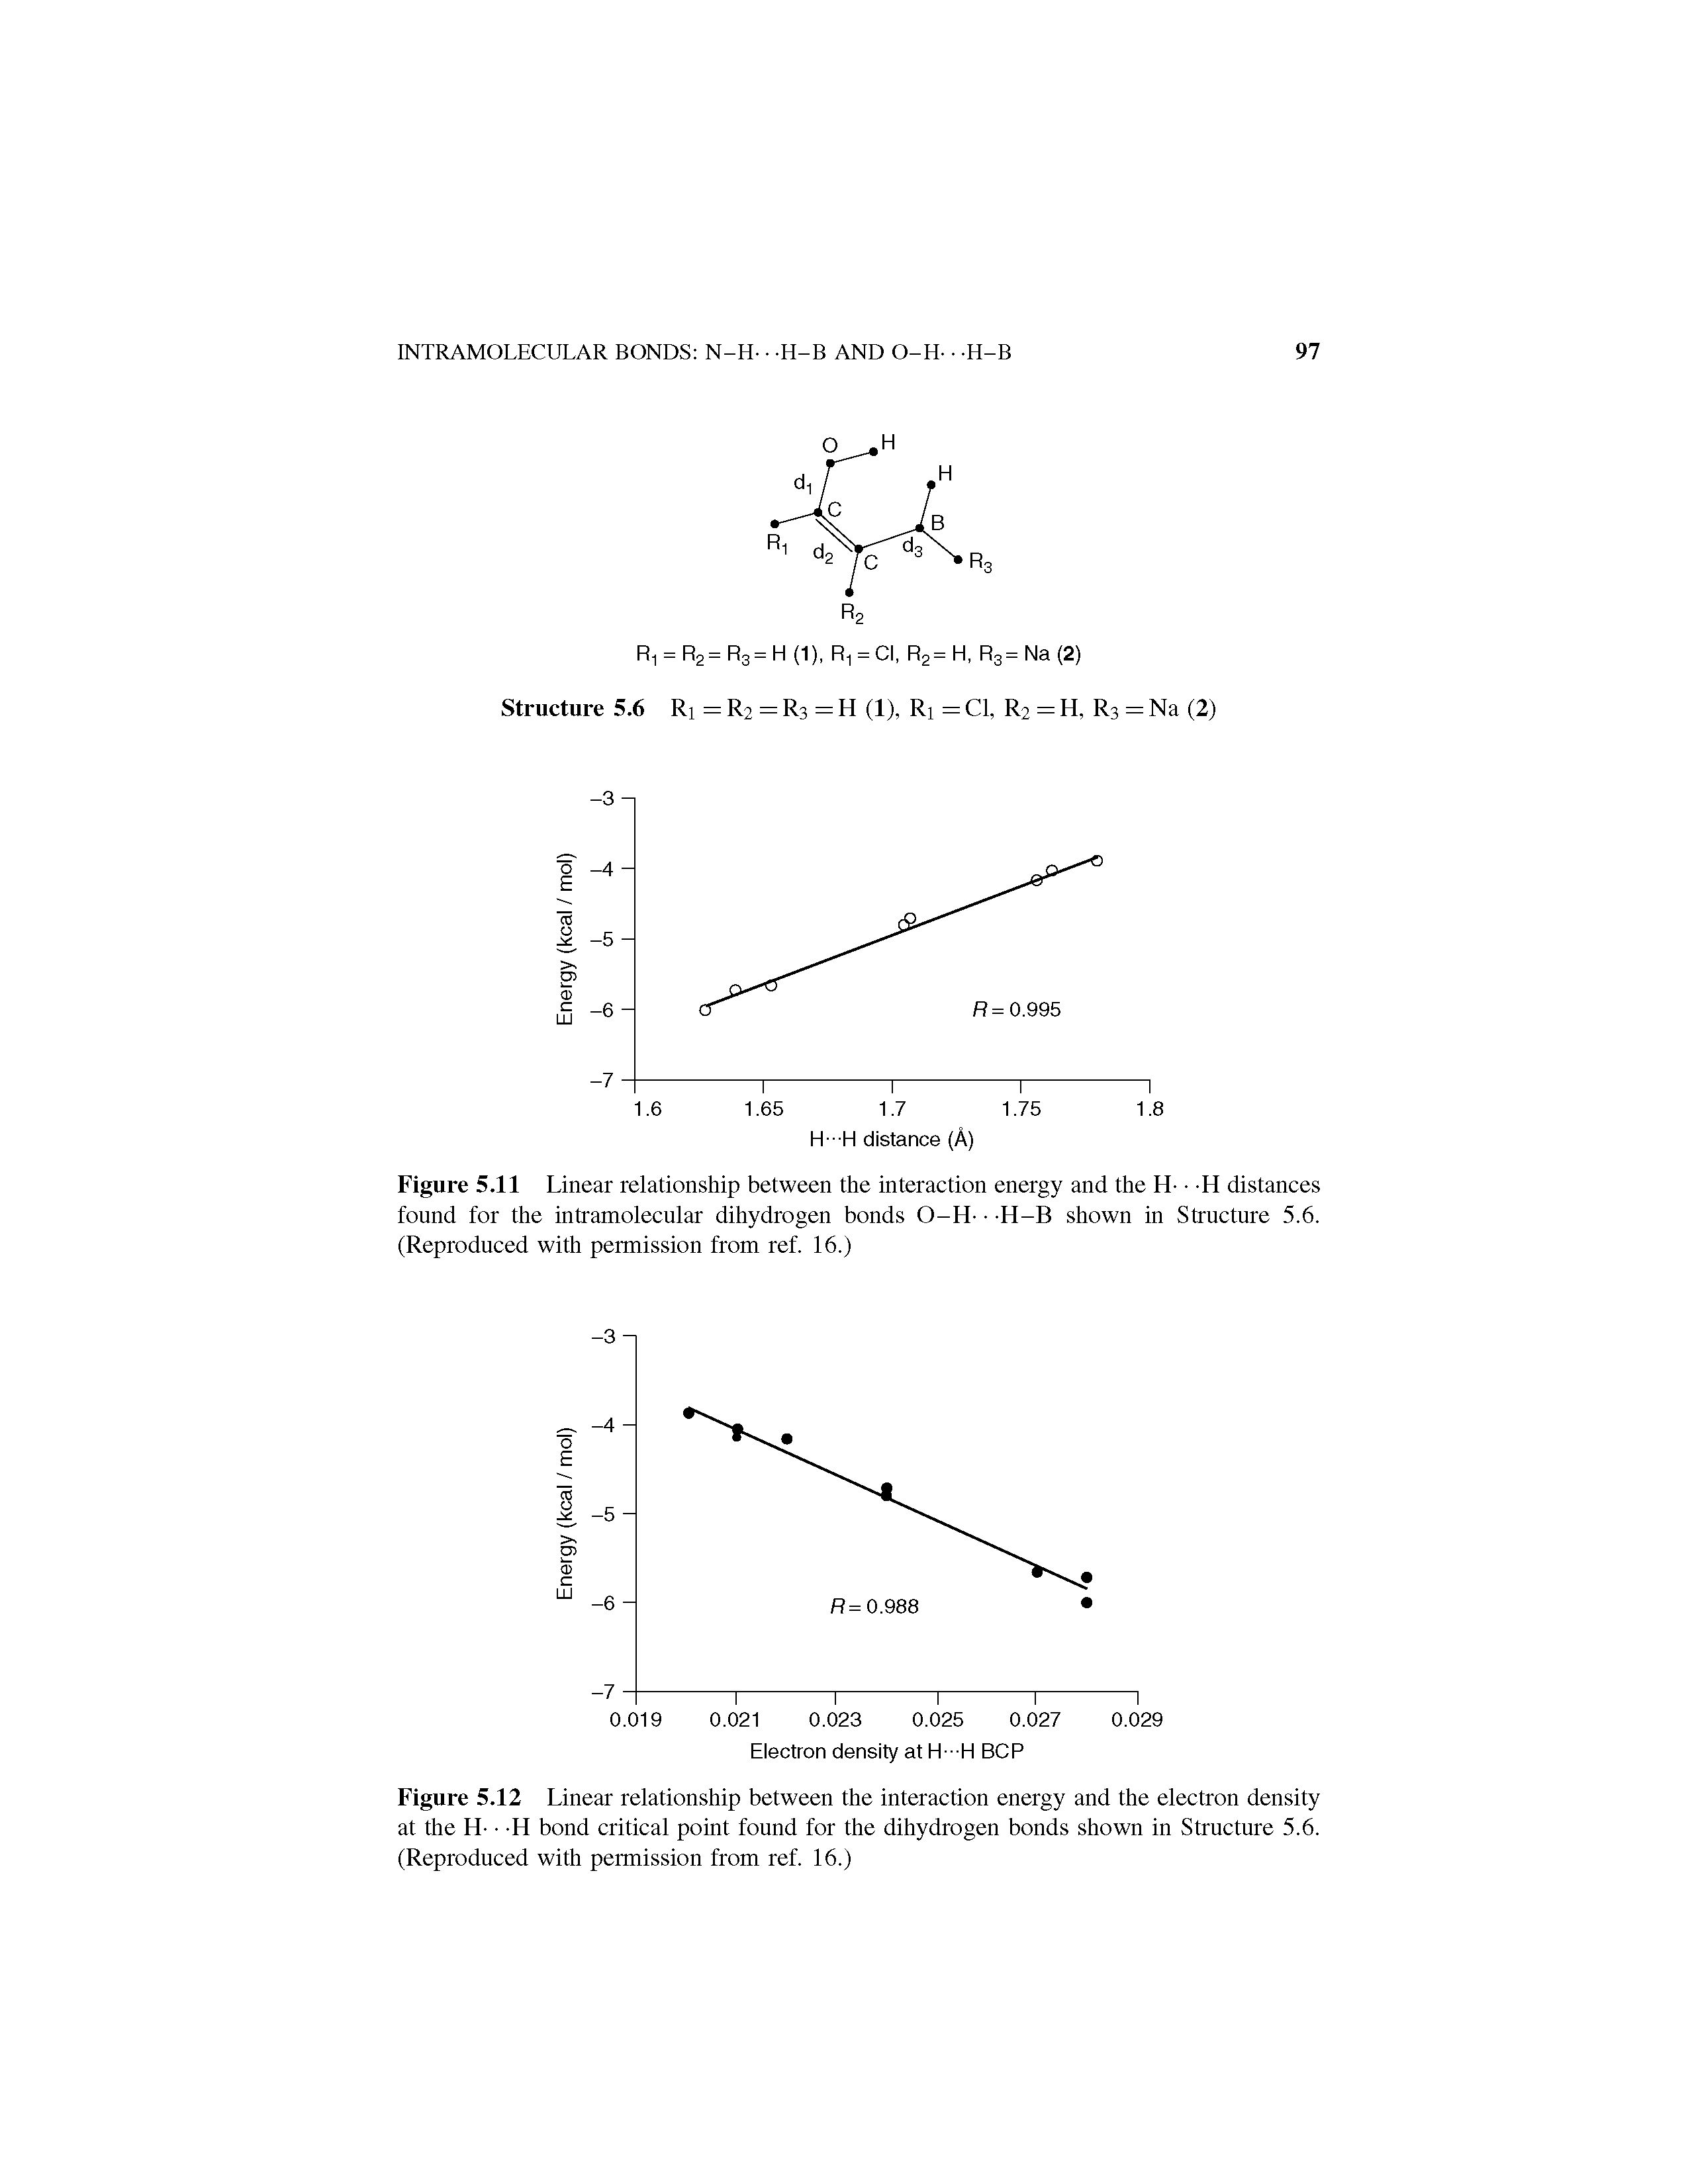 Figure 5.11 Linear relationship between the interaction energy and the H- -H distances found for the intramolecular dihydrogen bonds O-H- -H-B shown in Structure 5.6. (Reproduced with permission from ref. 16.)...